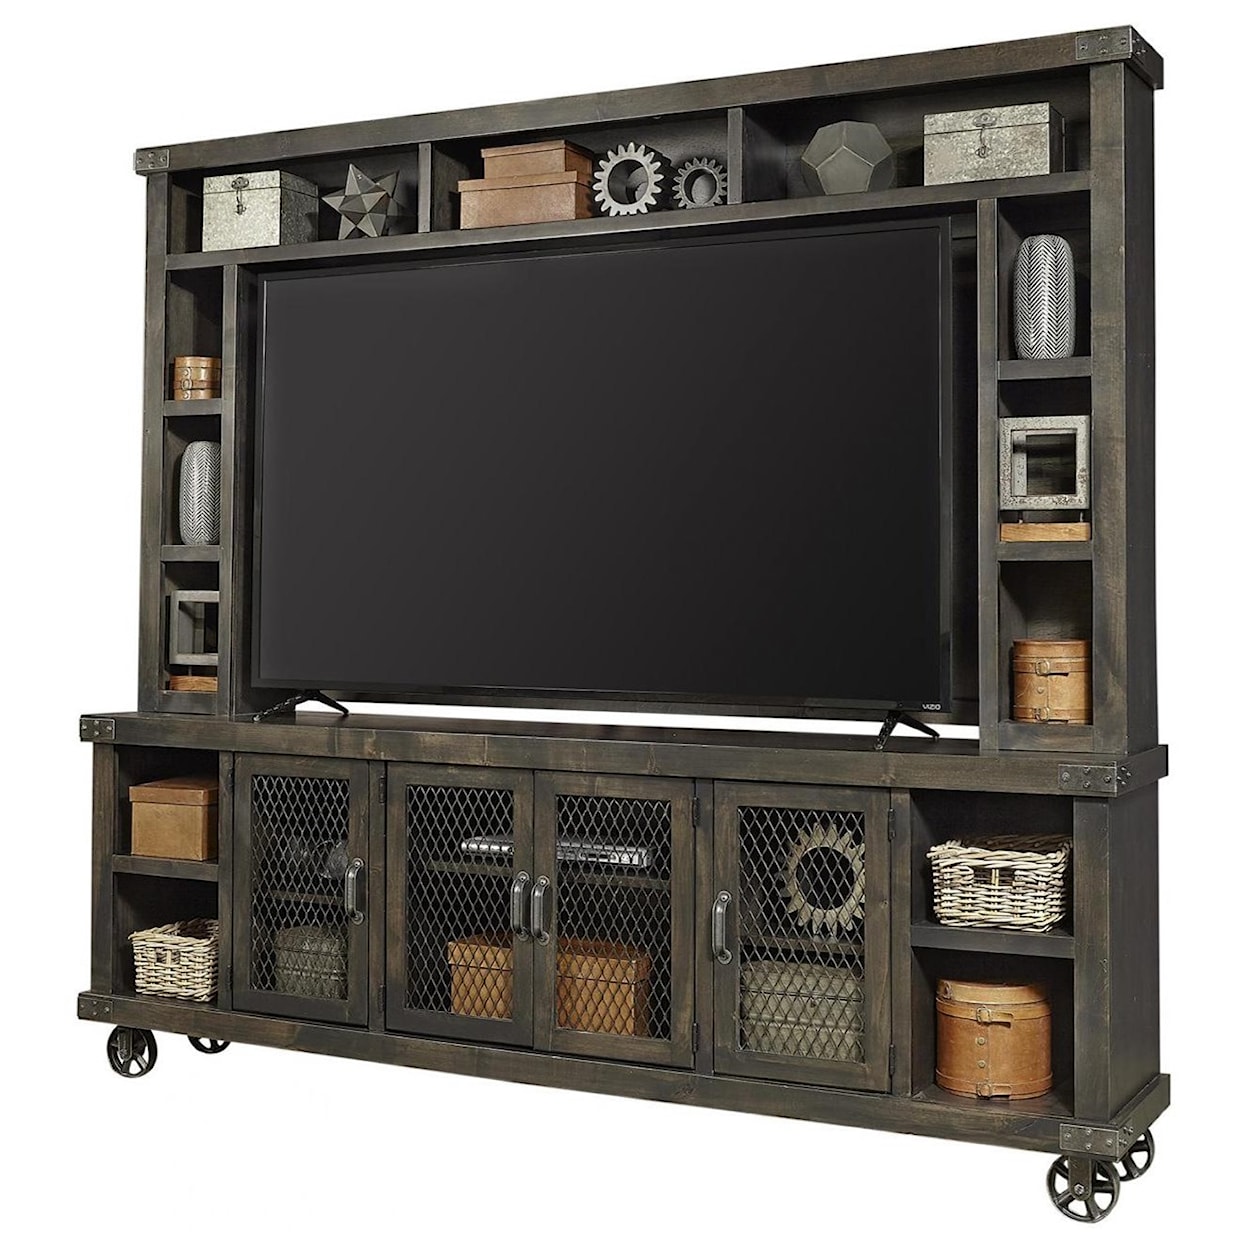 Aspenhome Industrial 96" TV Stand with Hutch